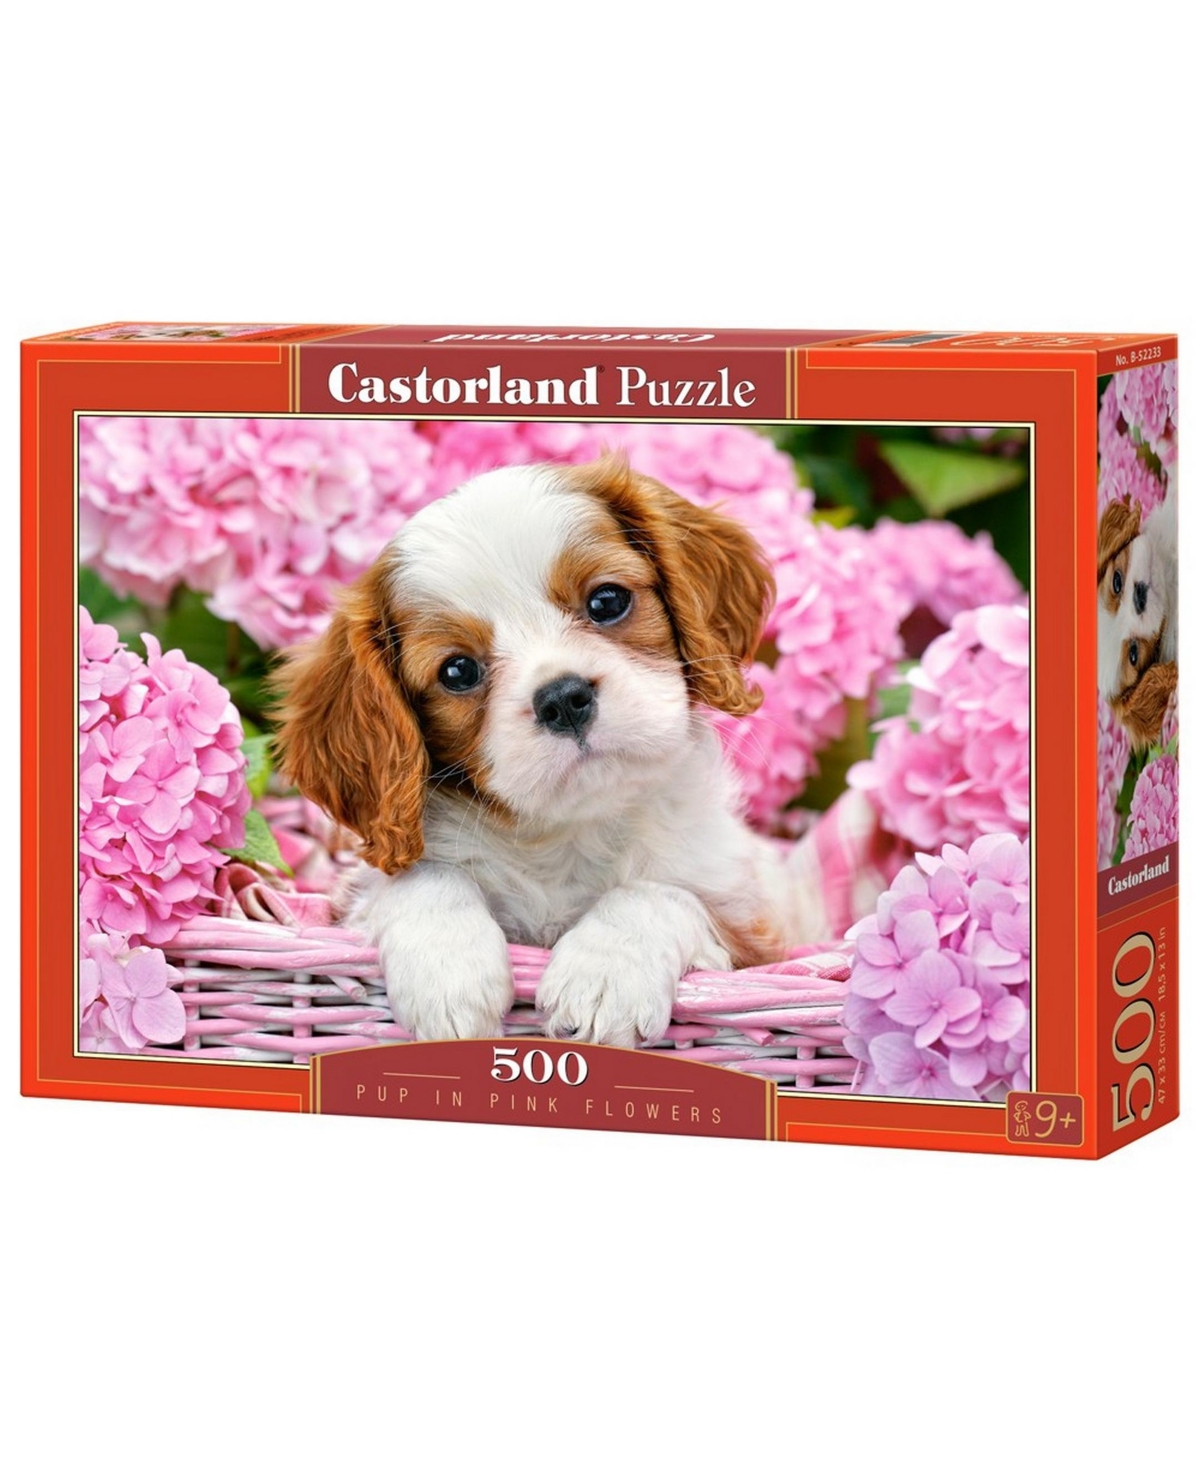 Castorland Kids' Pup In Pink Flowers Jigsaw Puzzle Set, 500 Piece In Multicolor